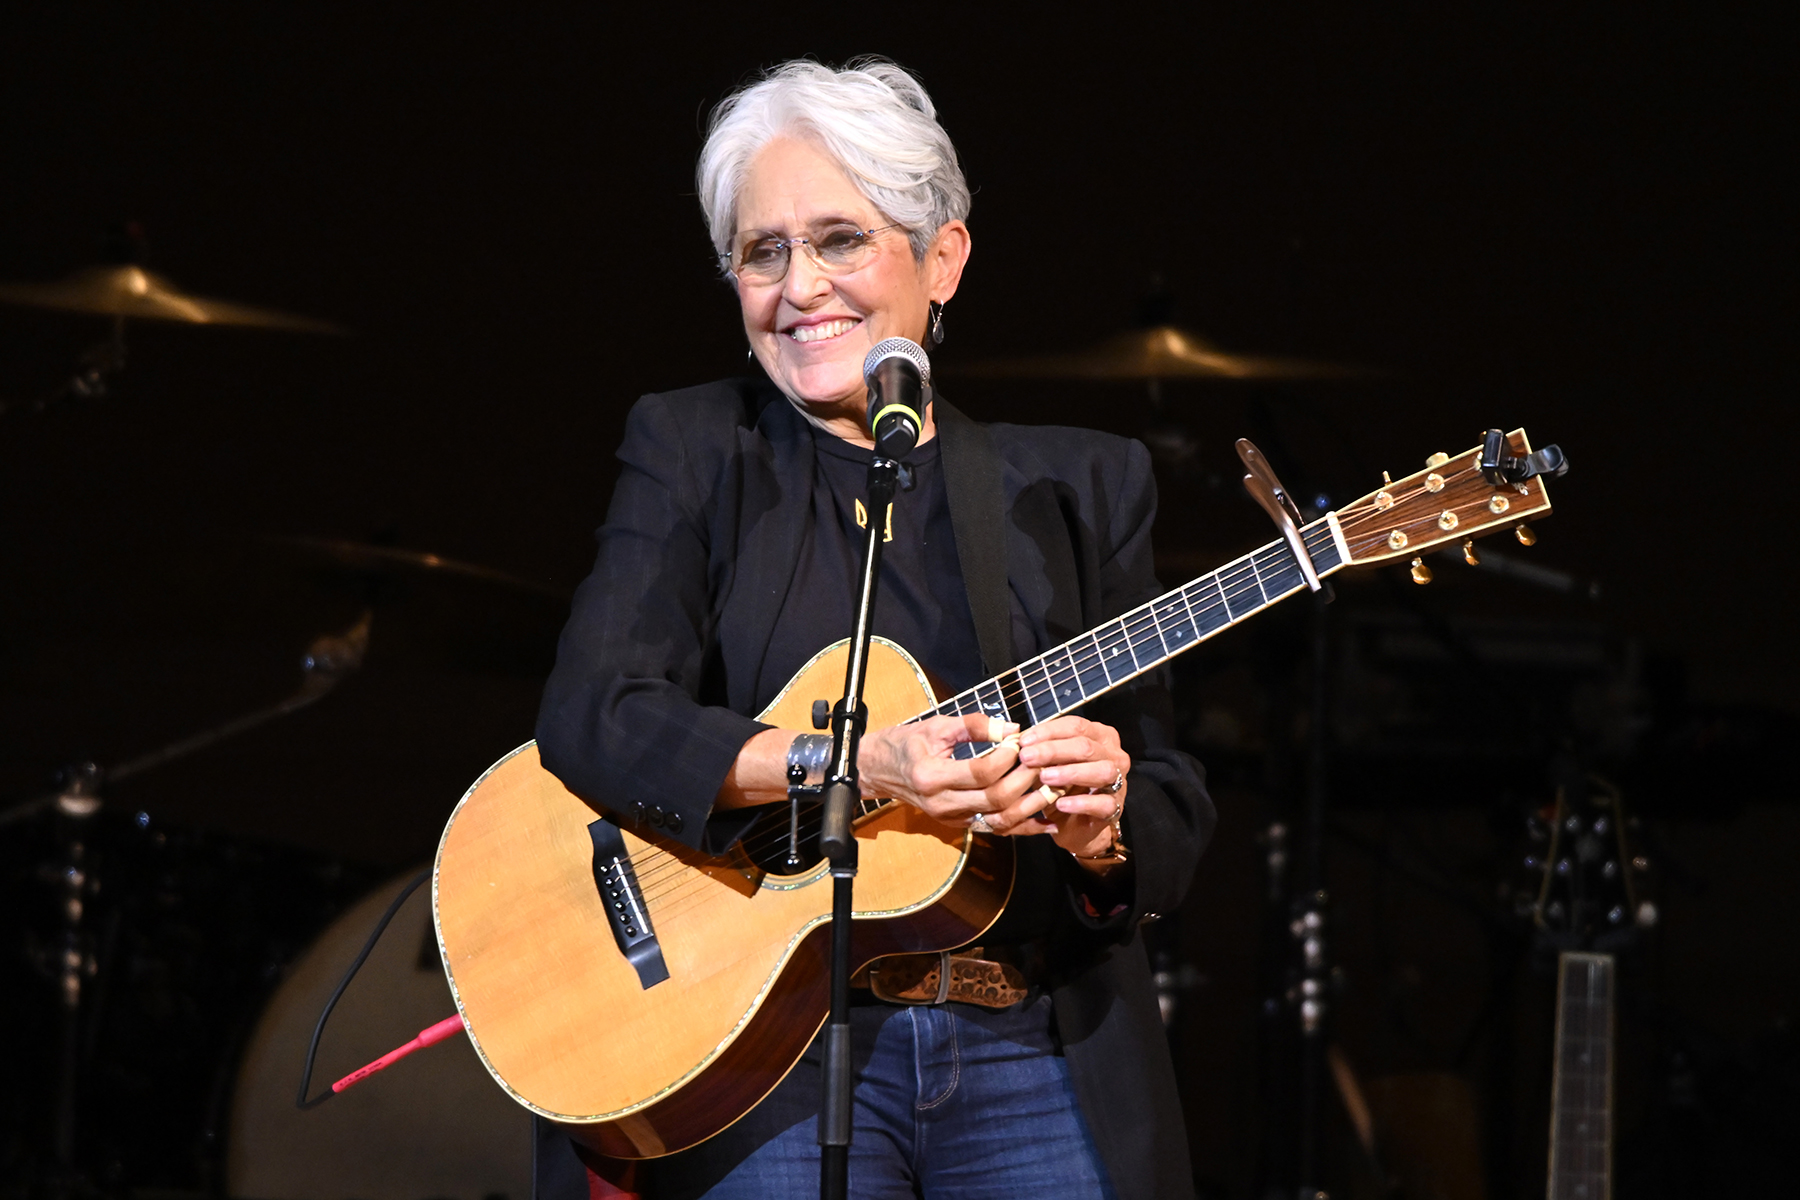 watch joan baez perform ‘don't think twice, it's all right' with maggie rogers